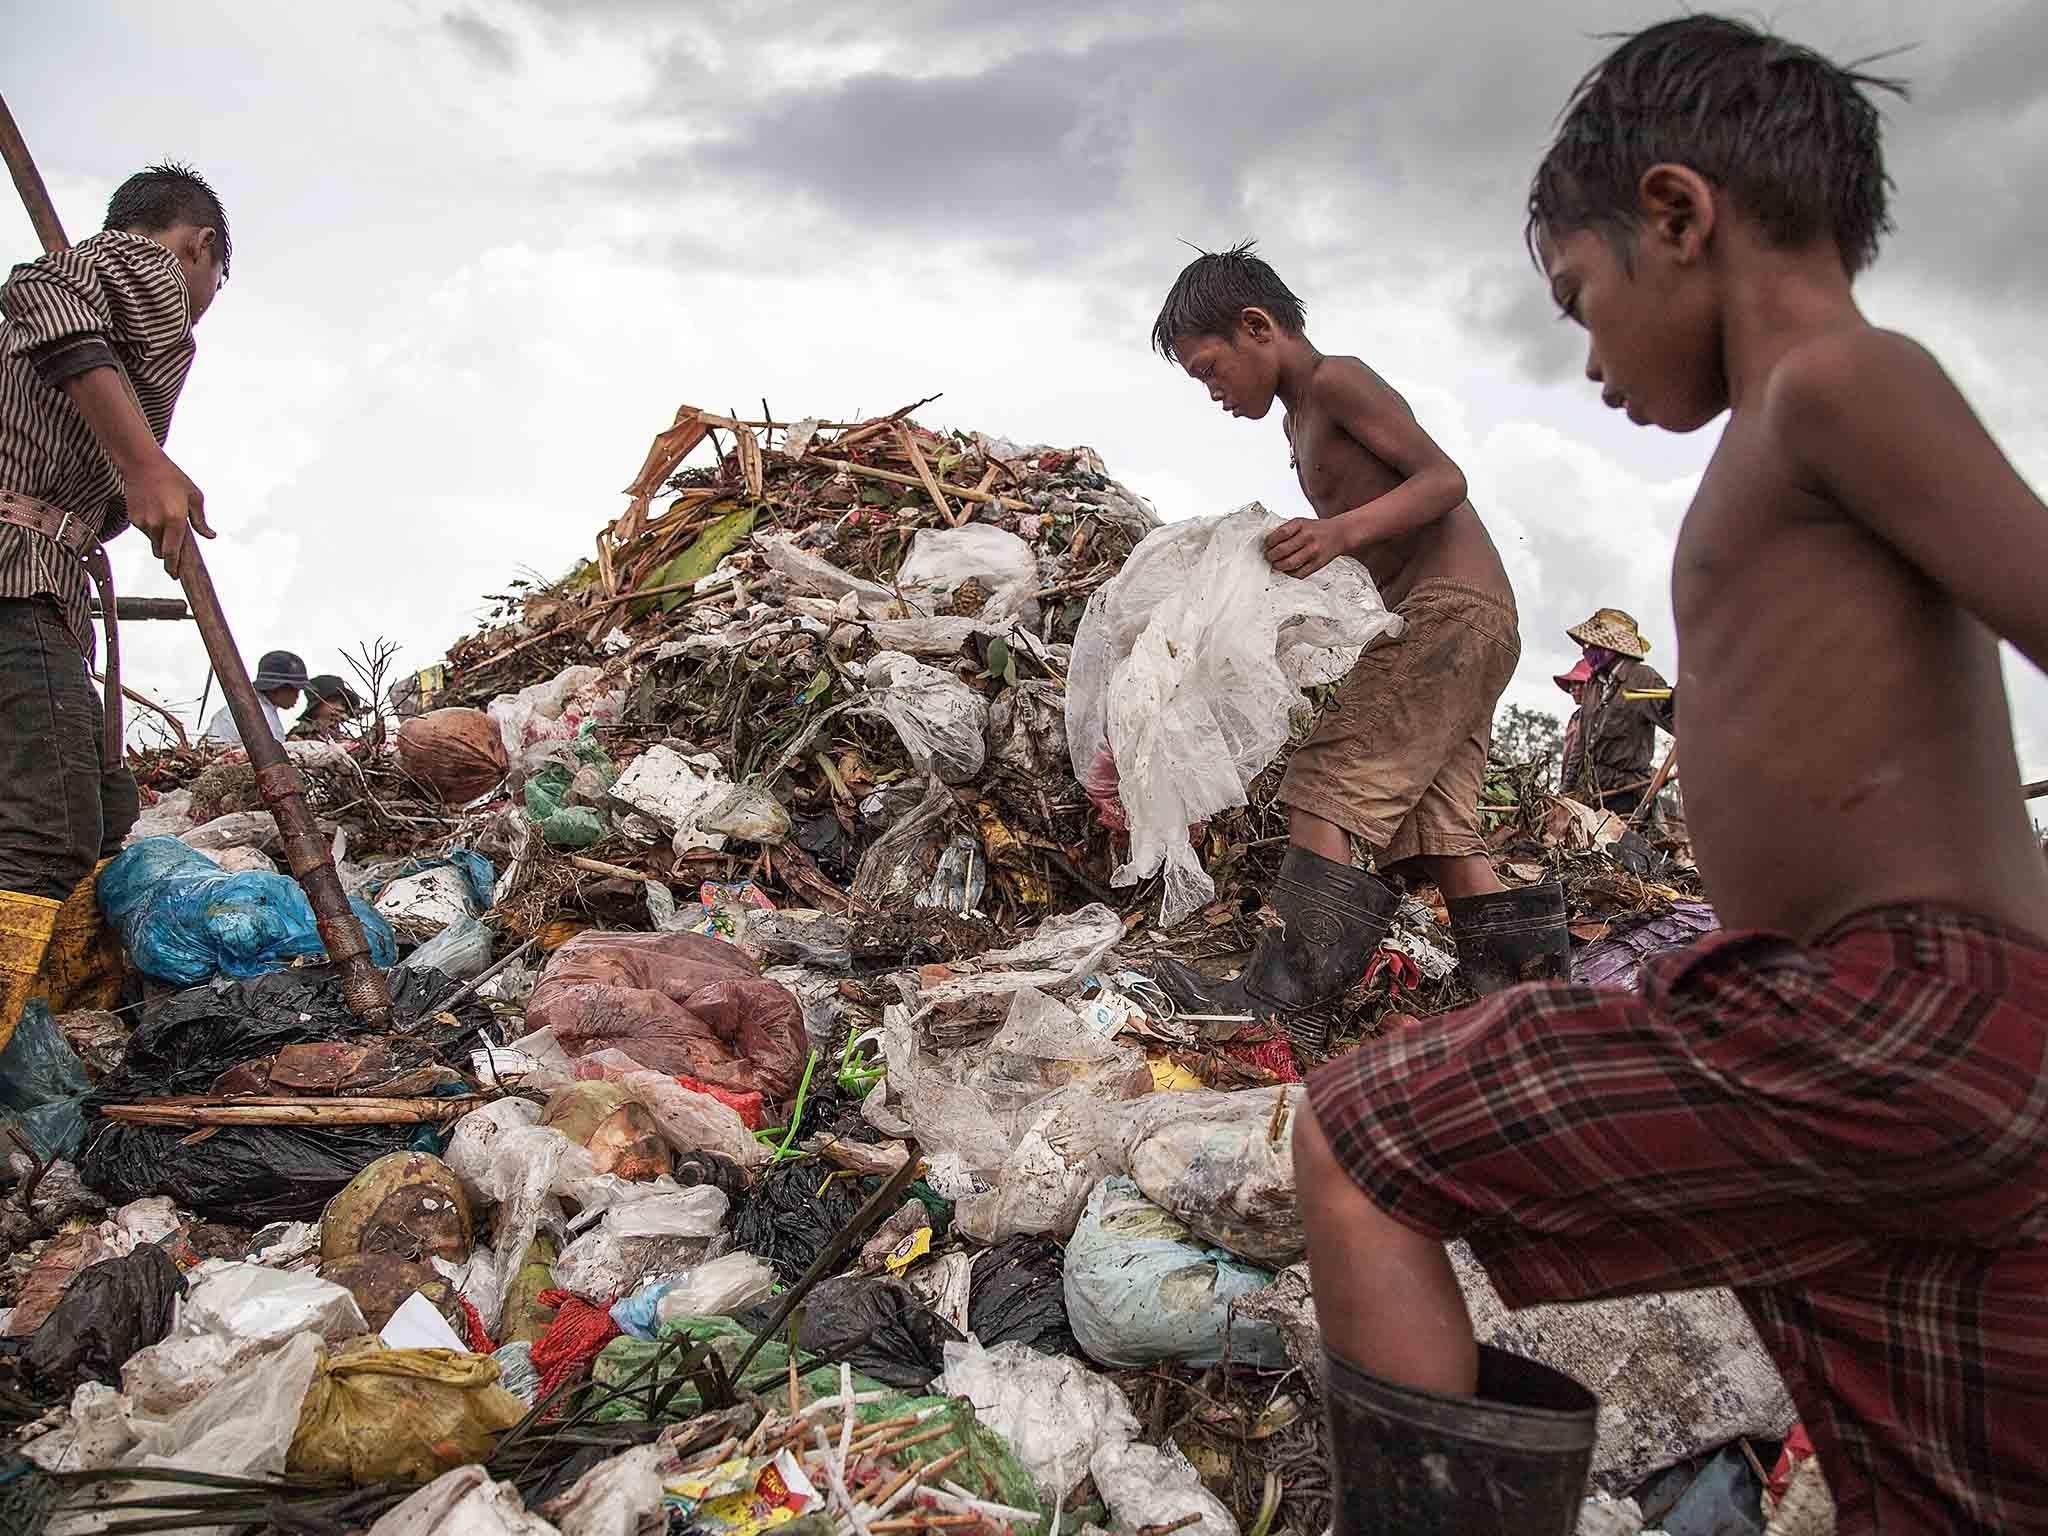 &#13;
A young scavenger boy grabs plastic between tons of trash in the Anlong Pi landfill on June 11, 2014 in Siem Reap, Cambodia. Dozens of children scavenge every day in the Anlong Pi landfill, which is situated only few kilometres away from the world famous Angkor temples, visited by more than 3 million tourists every year. &#13;